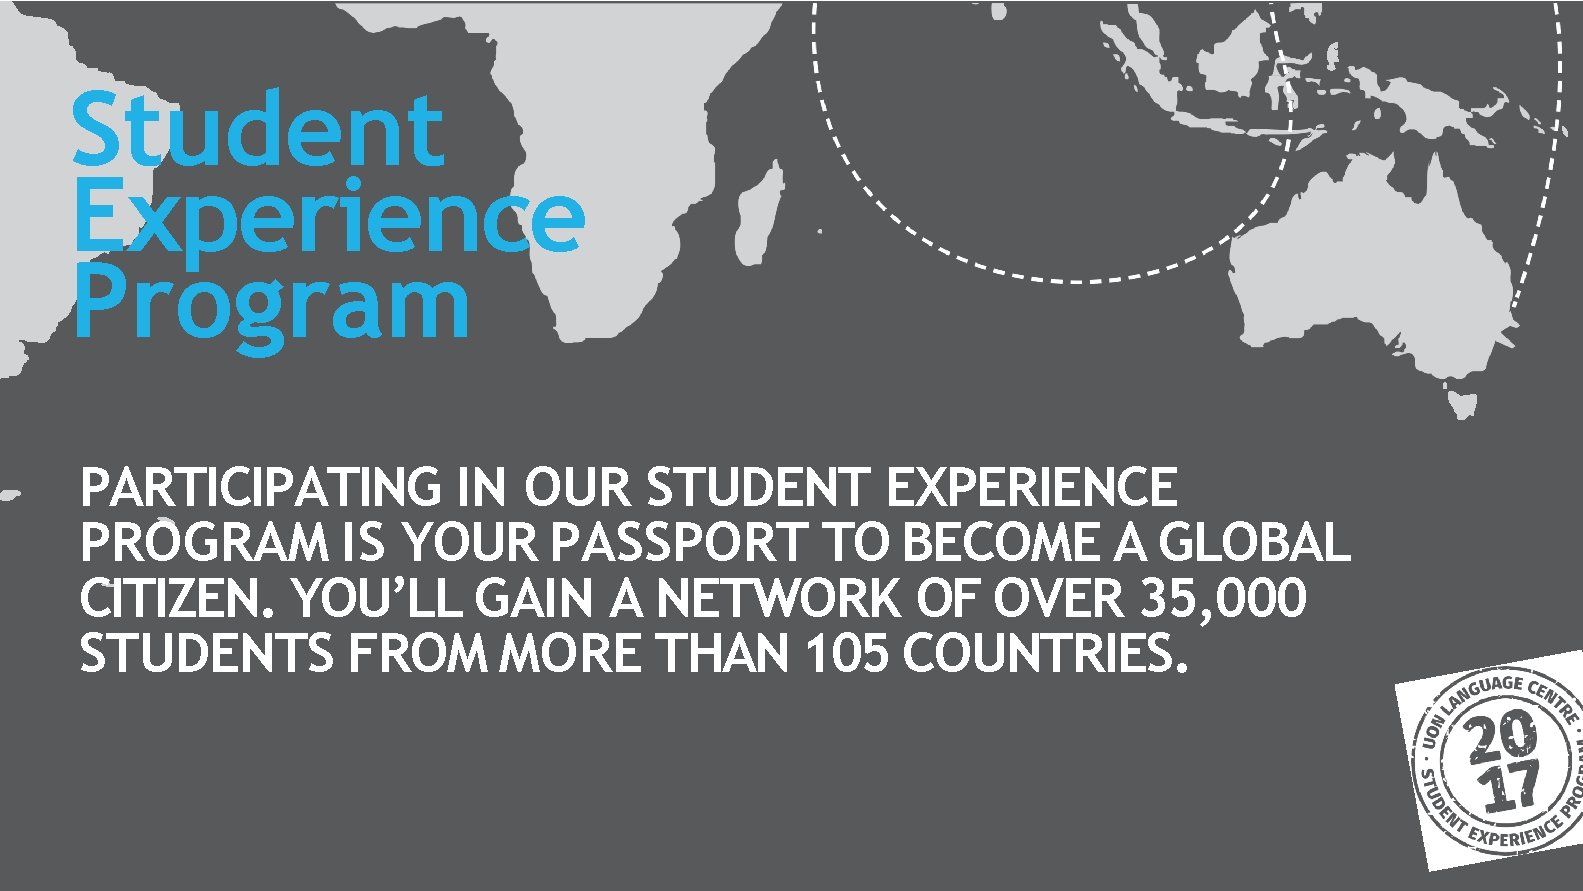 Student Experience Program PARTICIPATING IN OUR STUDENT EXPERIENCE PROGRAM IS YOUR PASSPORT TO BECOME